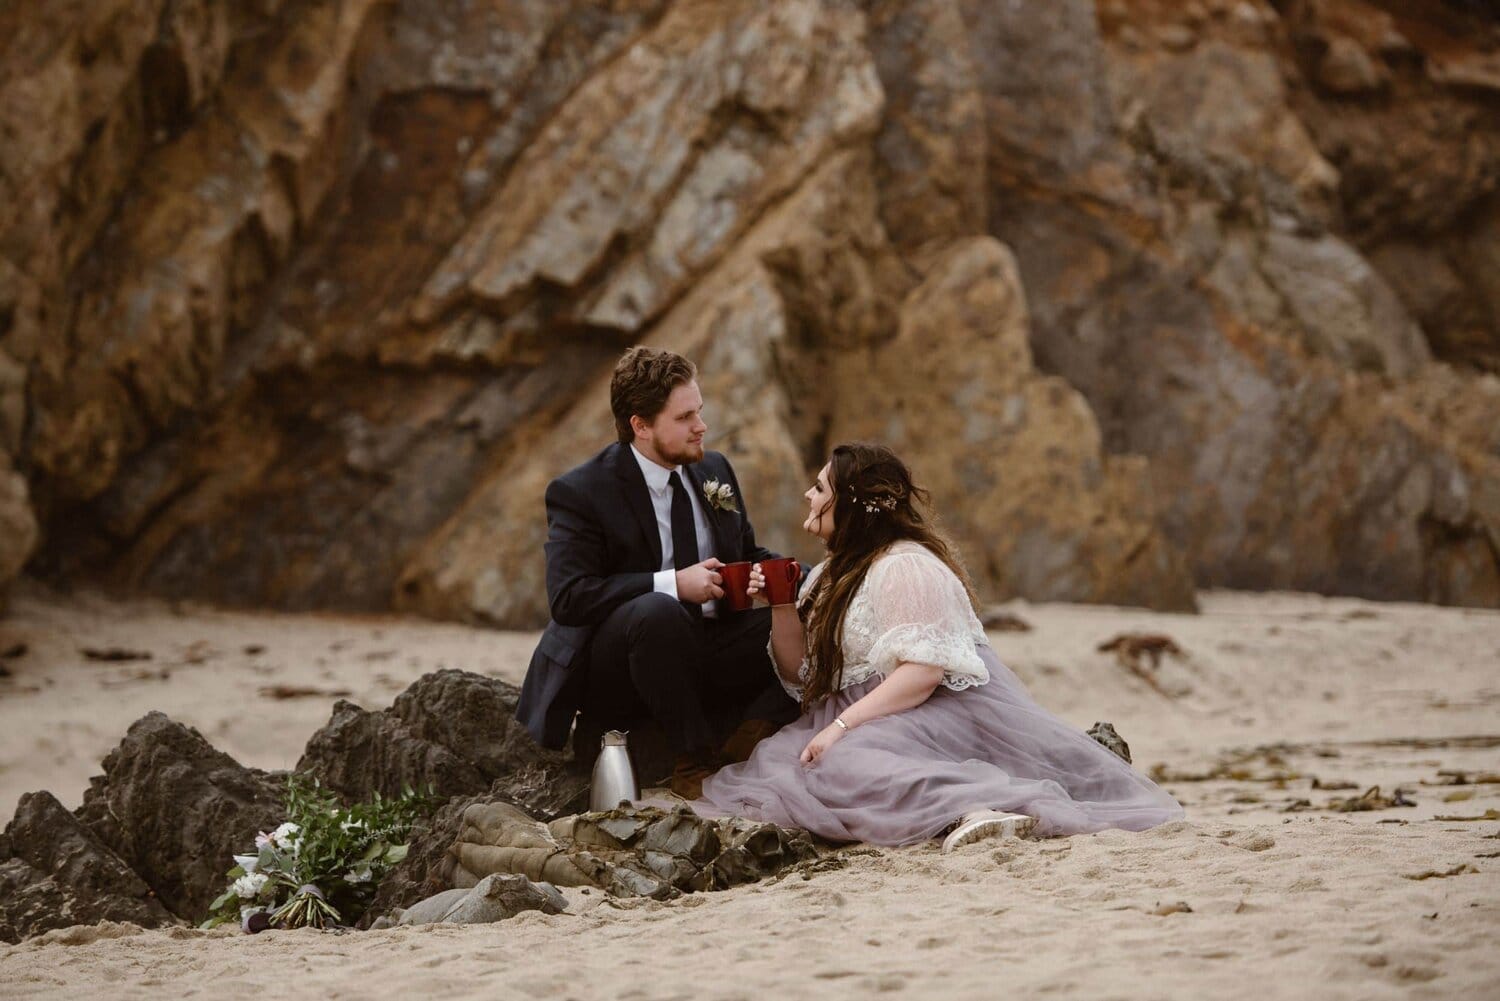 Bride and groom sitting on the beach at sunrise and drink coffee, in Big Sur, California.